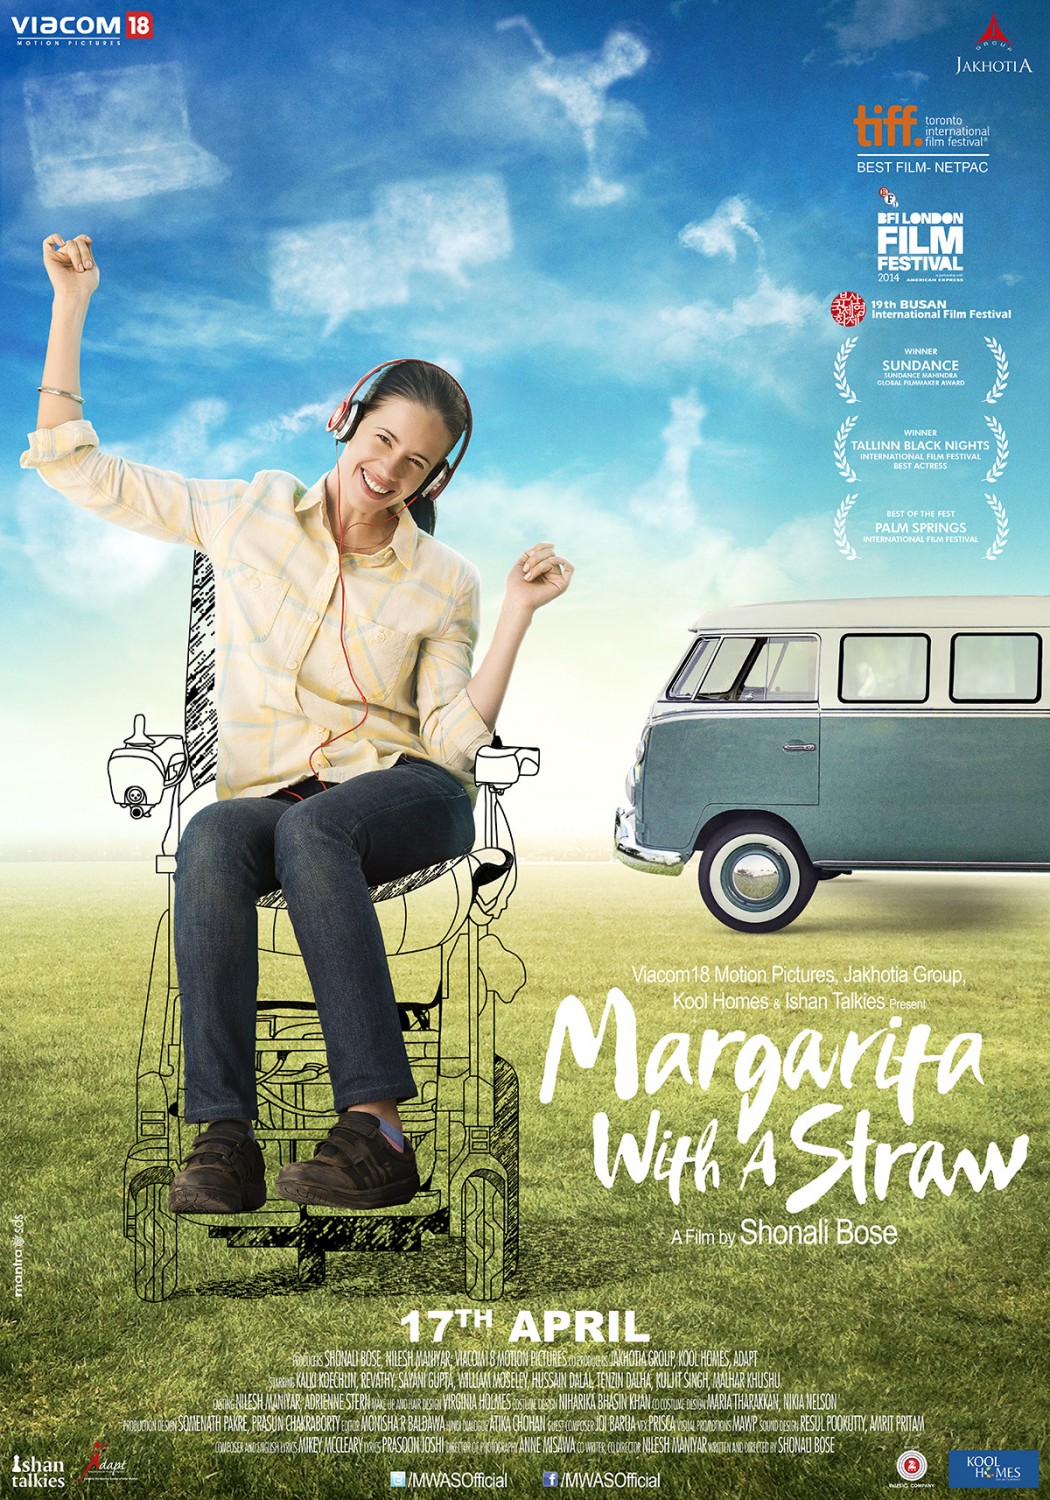 Extra Large Movie Poster Image for Margarita, with a Straw (#2 of 2)